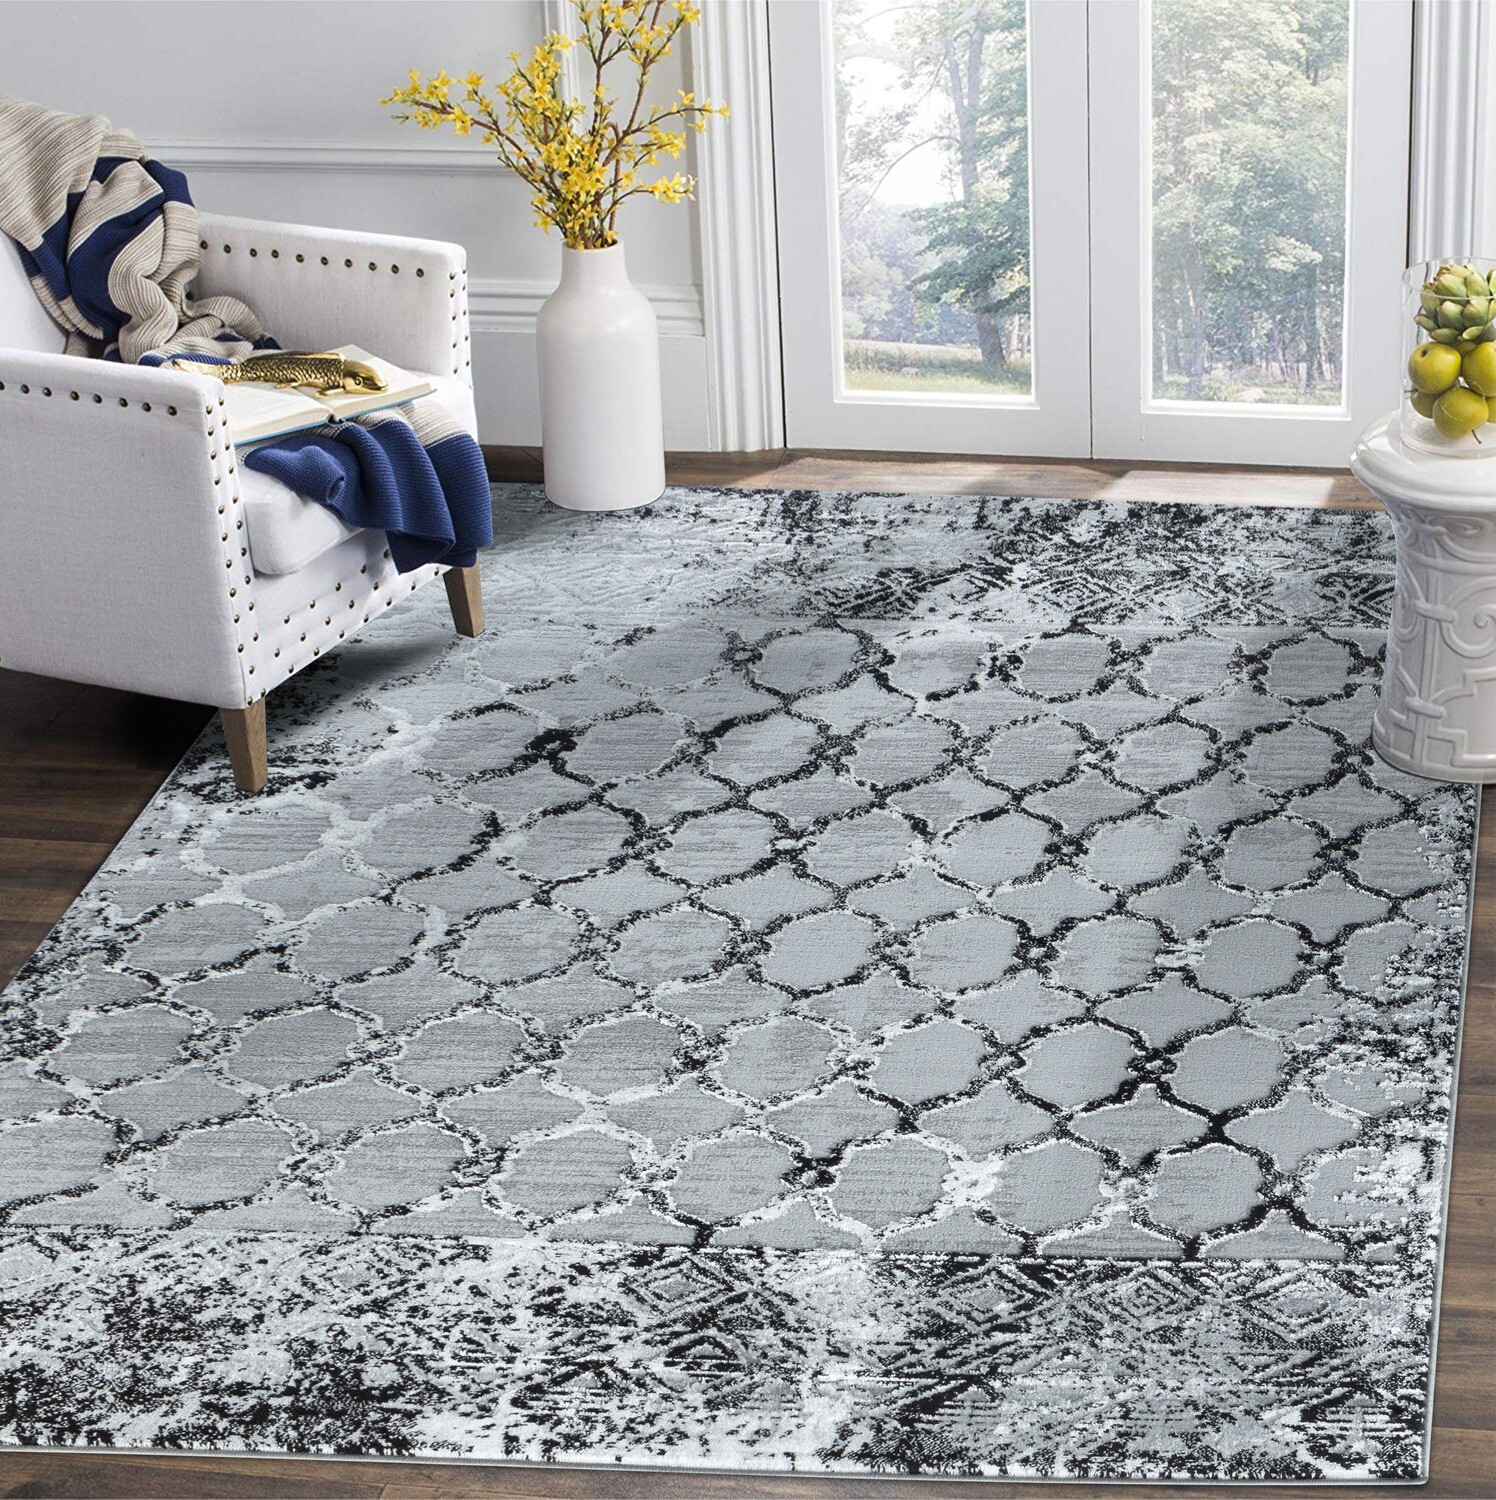 Glory Rugs Modern Abstract Trellis Area Rug  Grey Black Rugs for Home Office Bedroom and Living Room